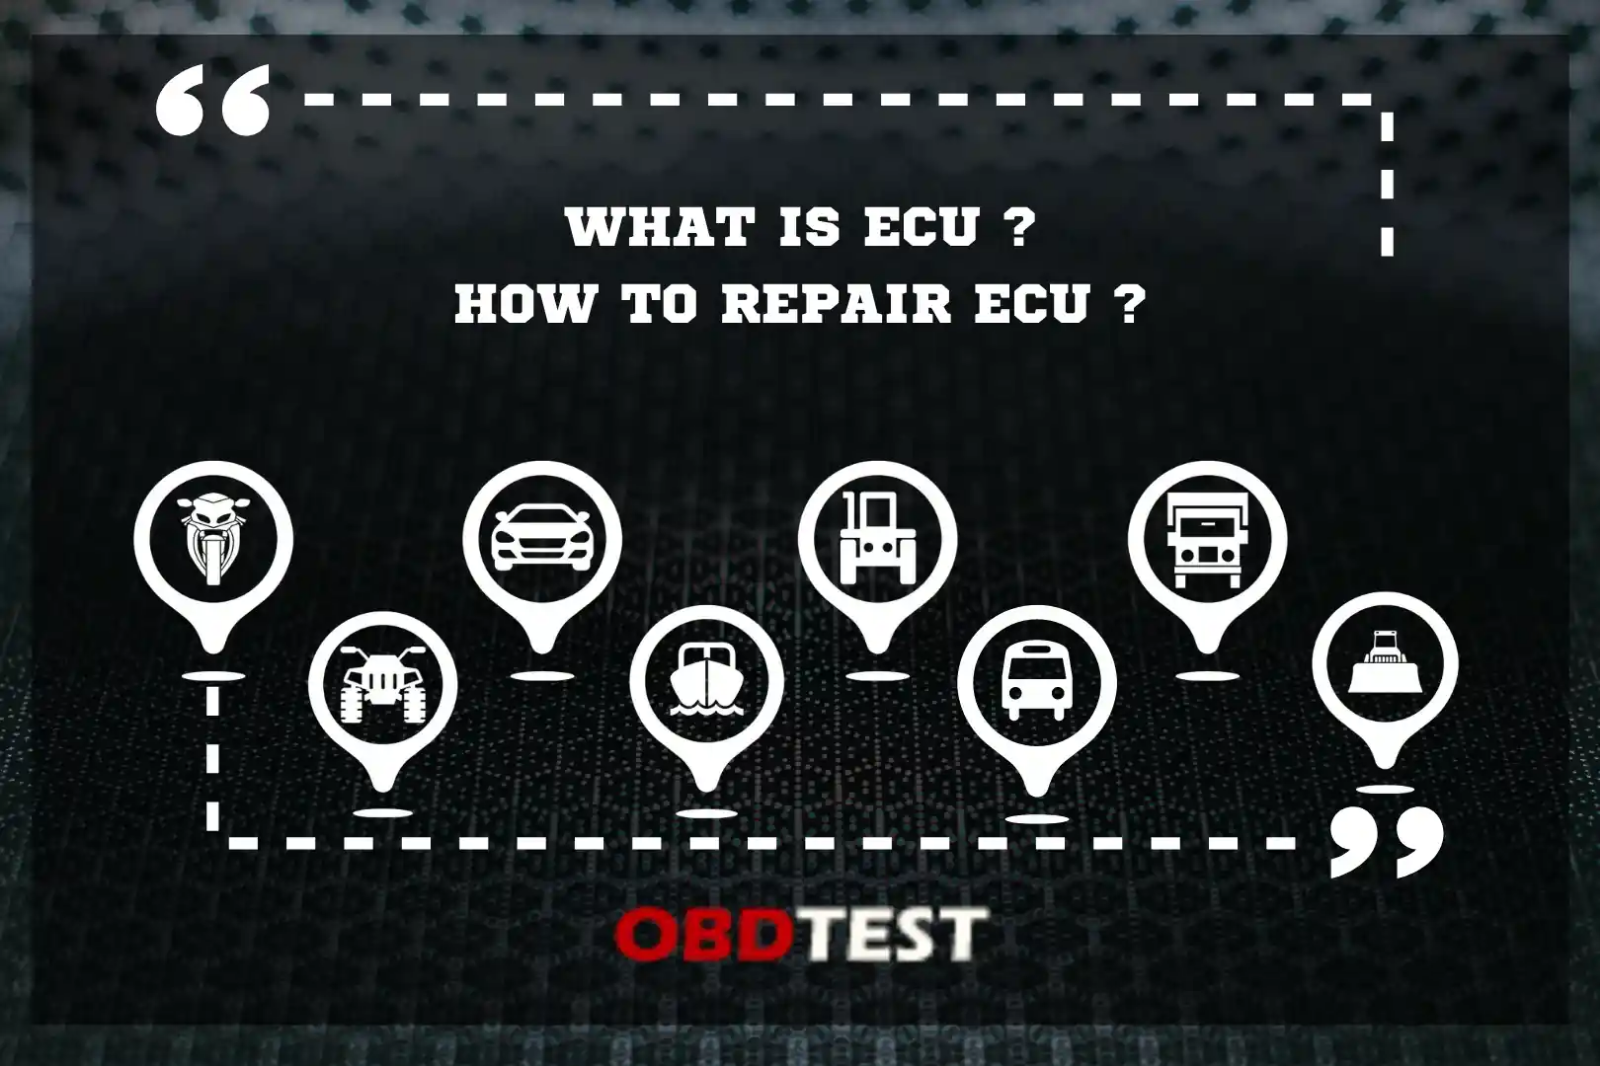 What is ECU and how to repair the ECU?